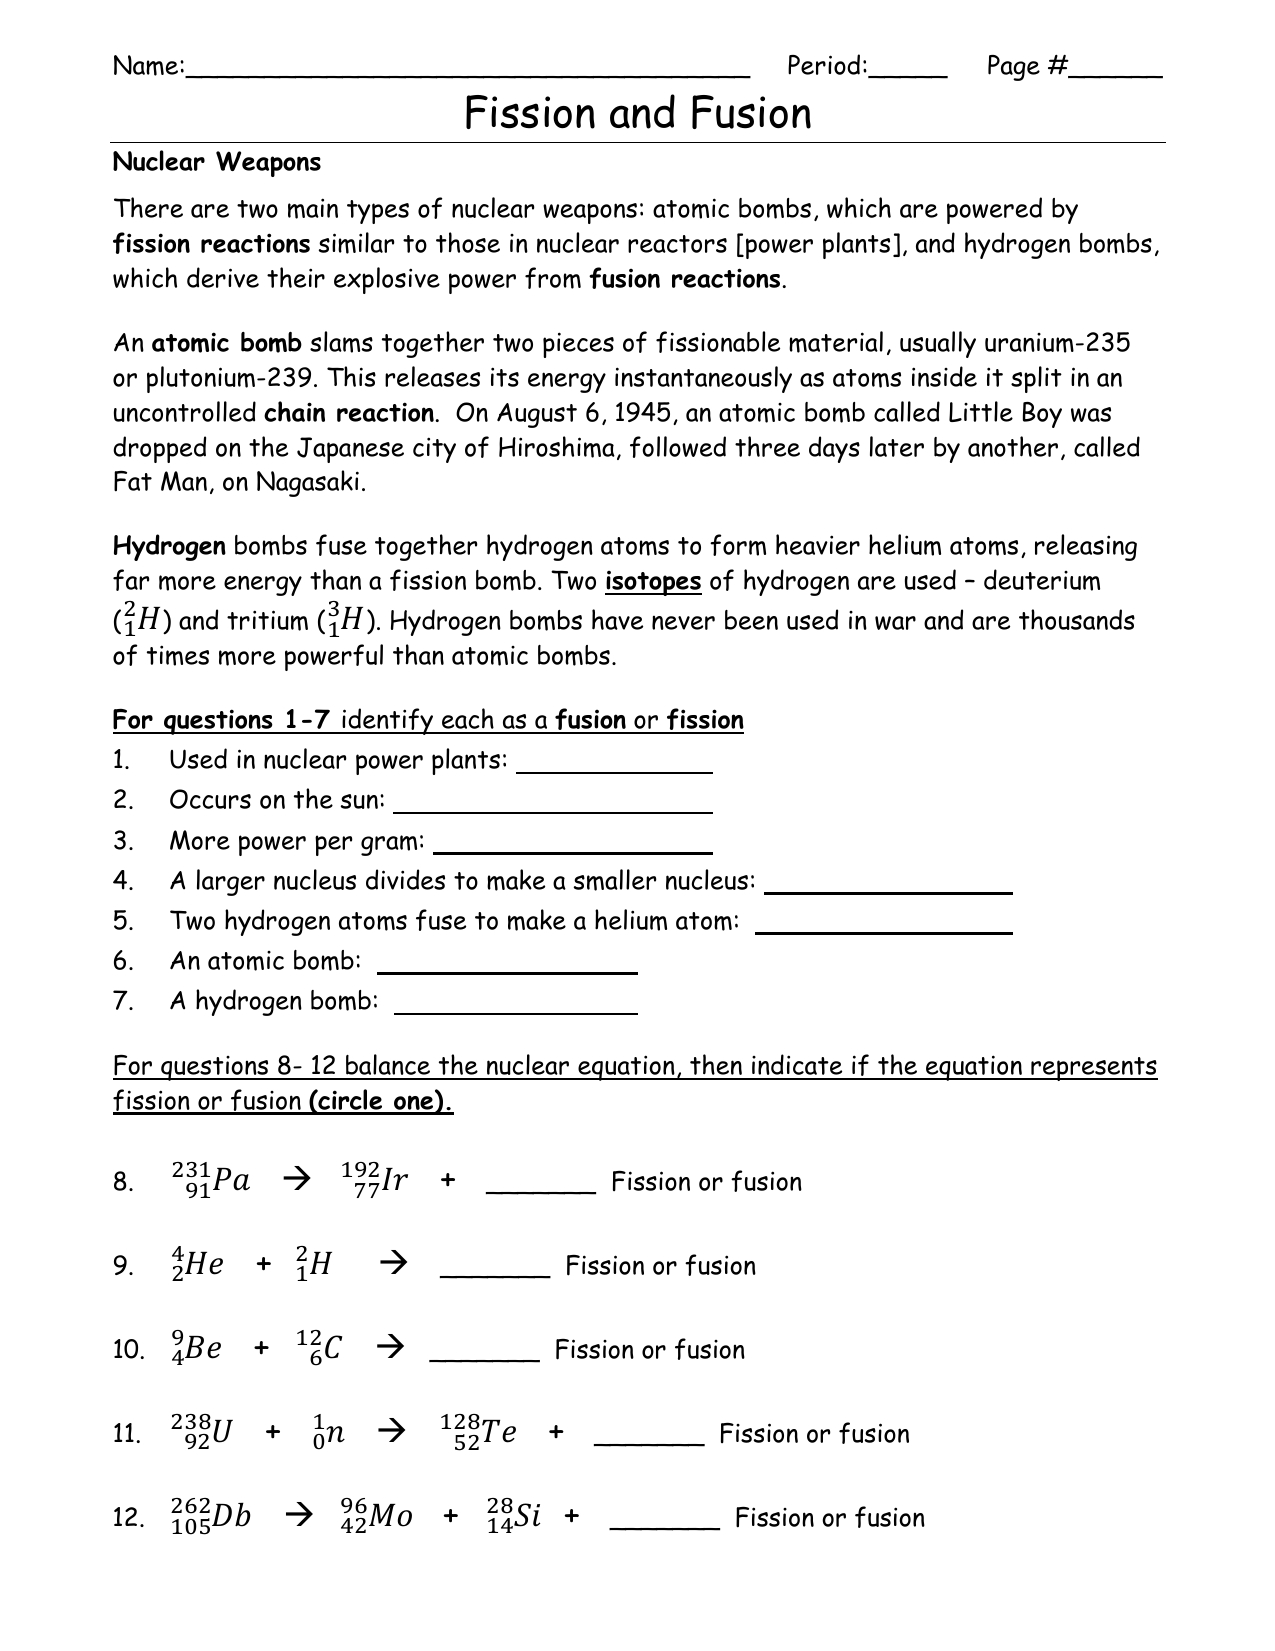 Fission Versus Fusion Worksheet Answers db excel com